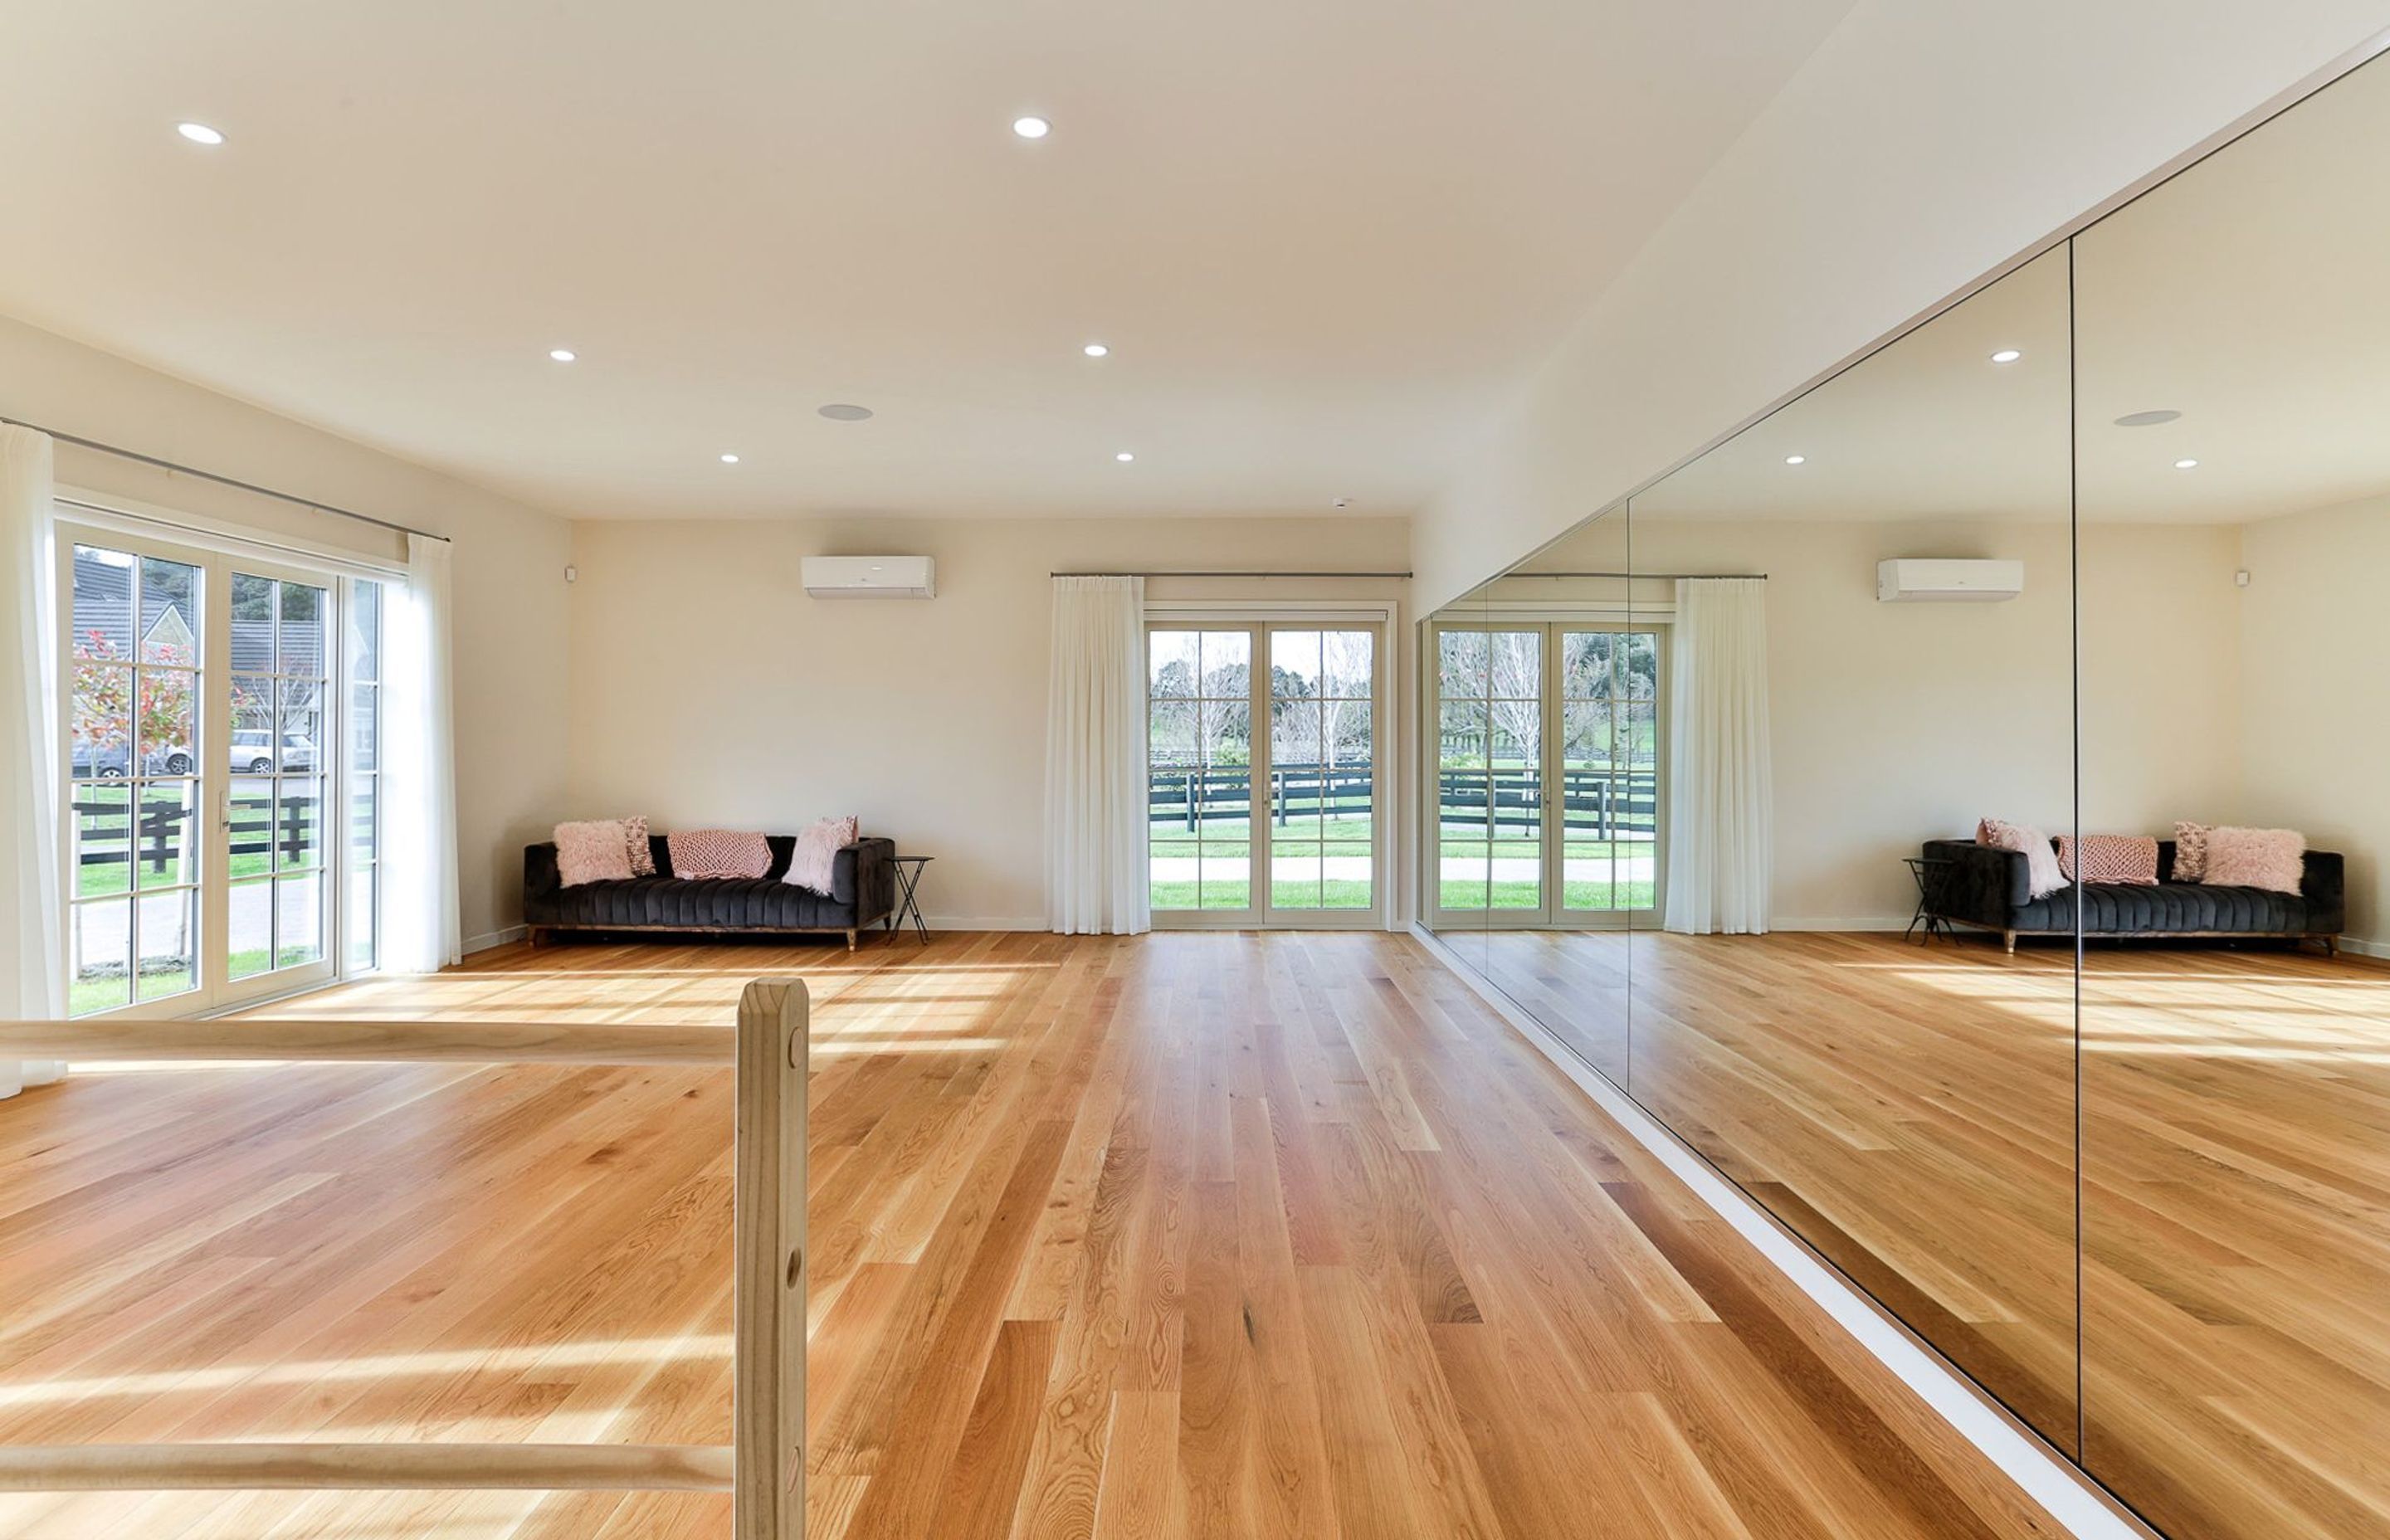 The dance studio has a sprung timber dance floor, a wall of mirrors and French doors leading out into the landscape.